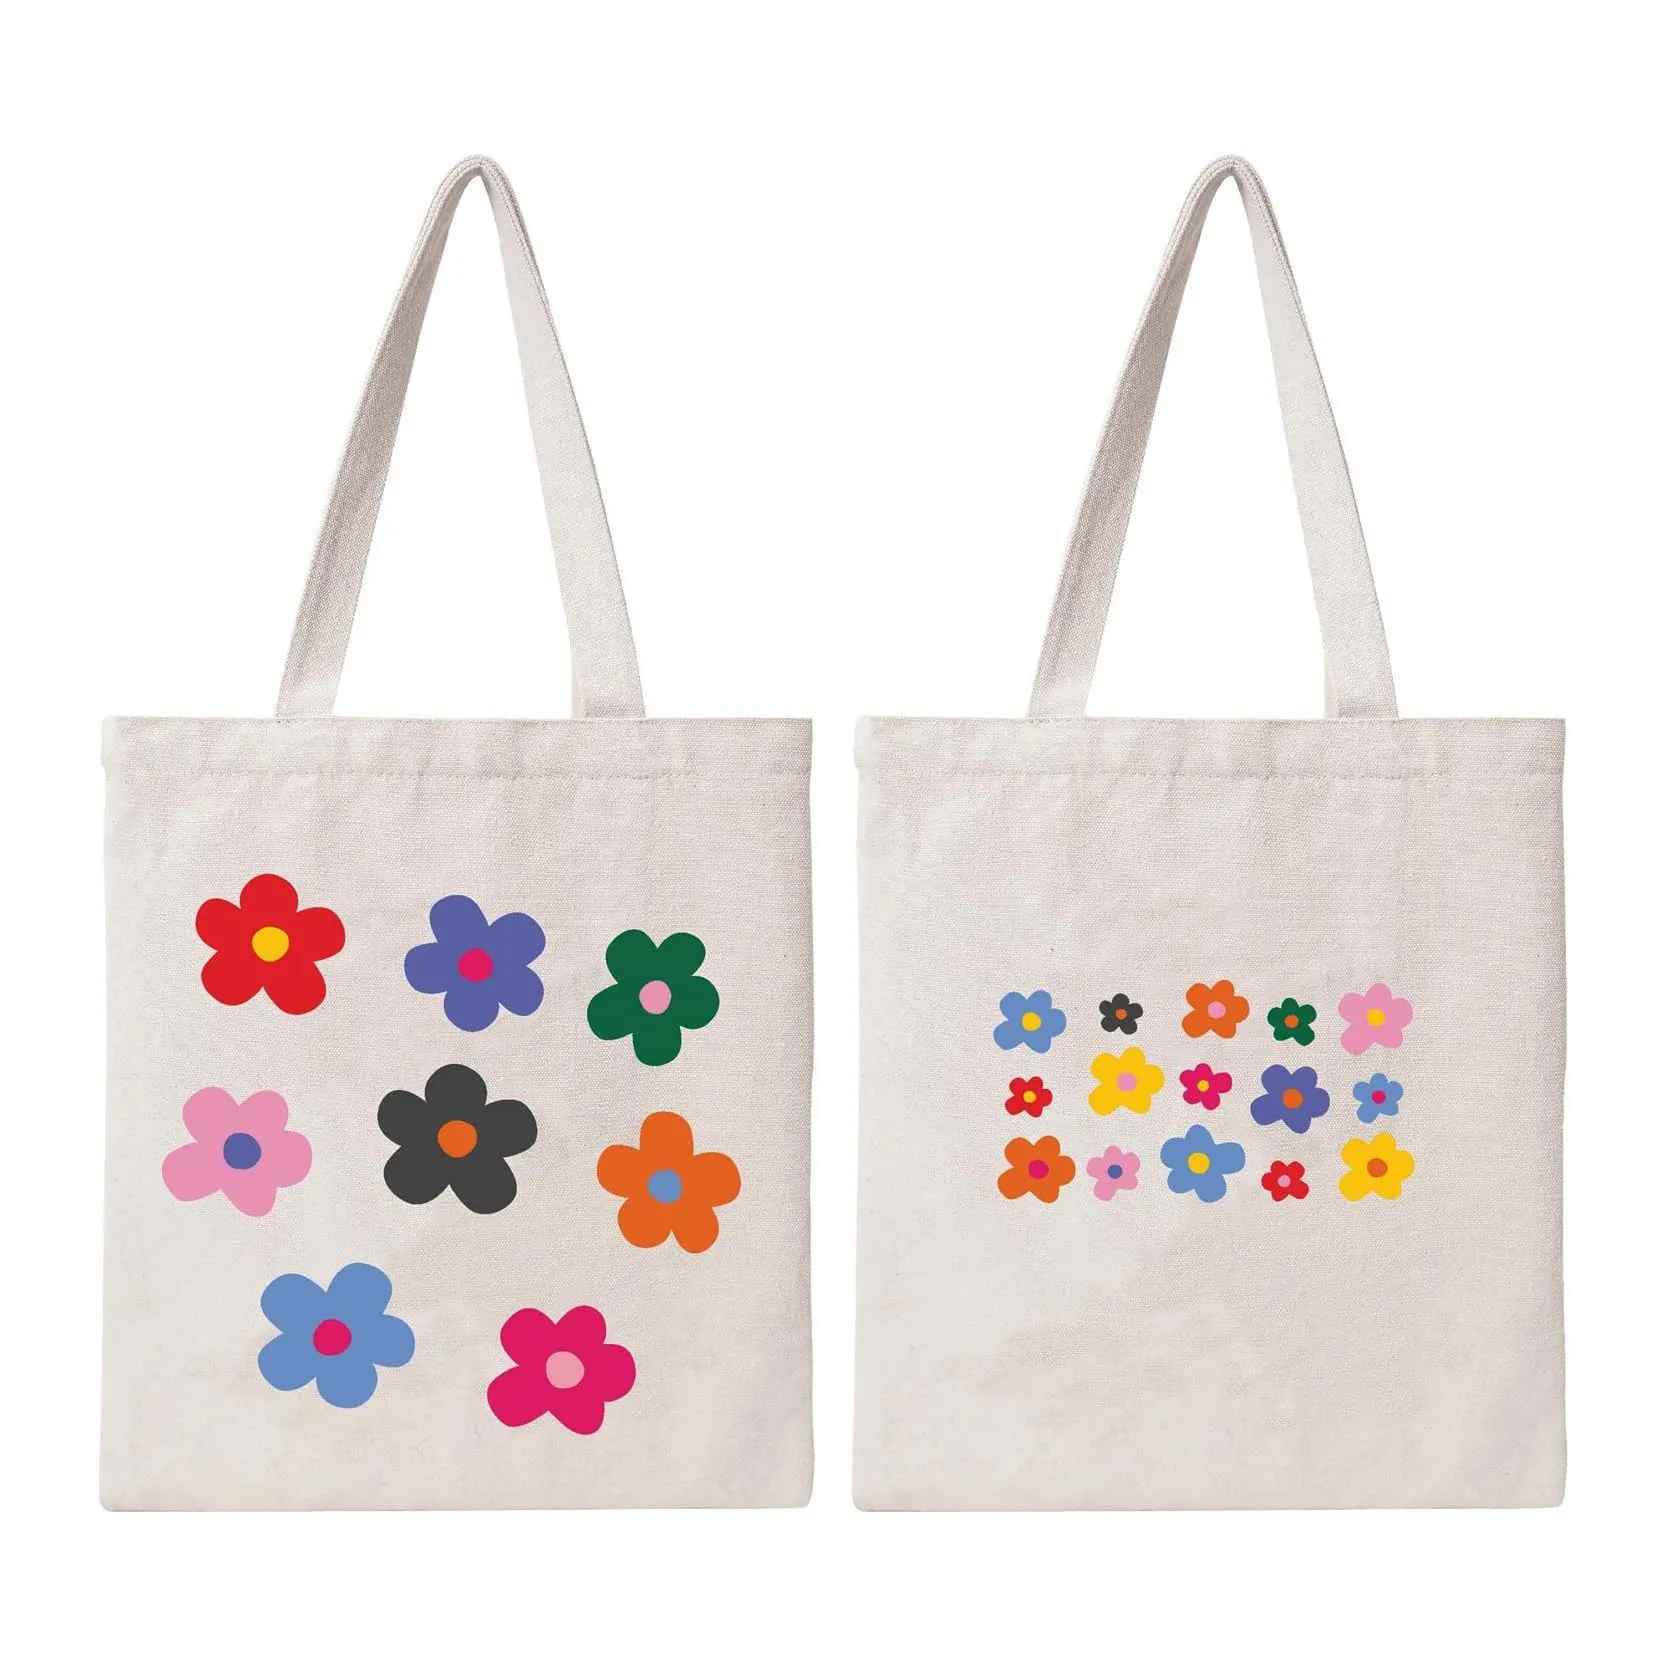 Ladies Colorful Cartoon flower pattern tote customized LOGO heavy purchase shopping beach Travel white cotton bag for gift